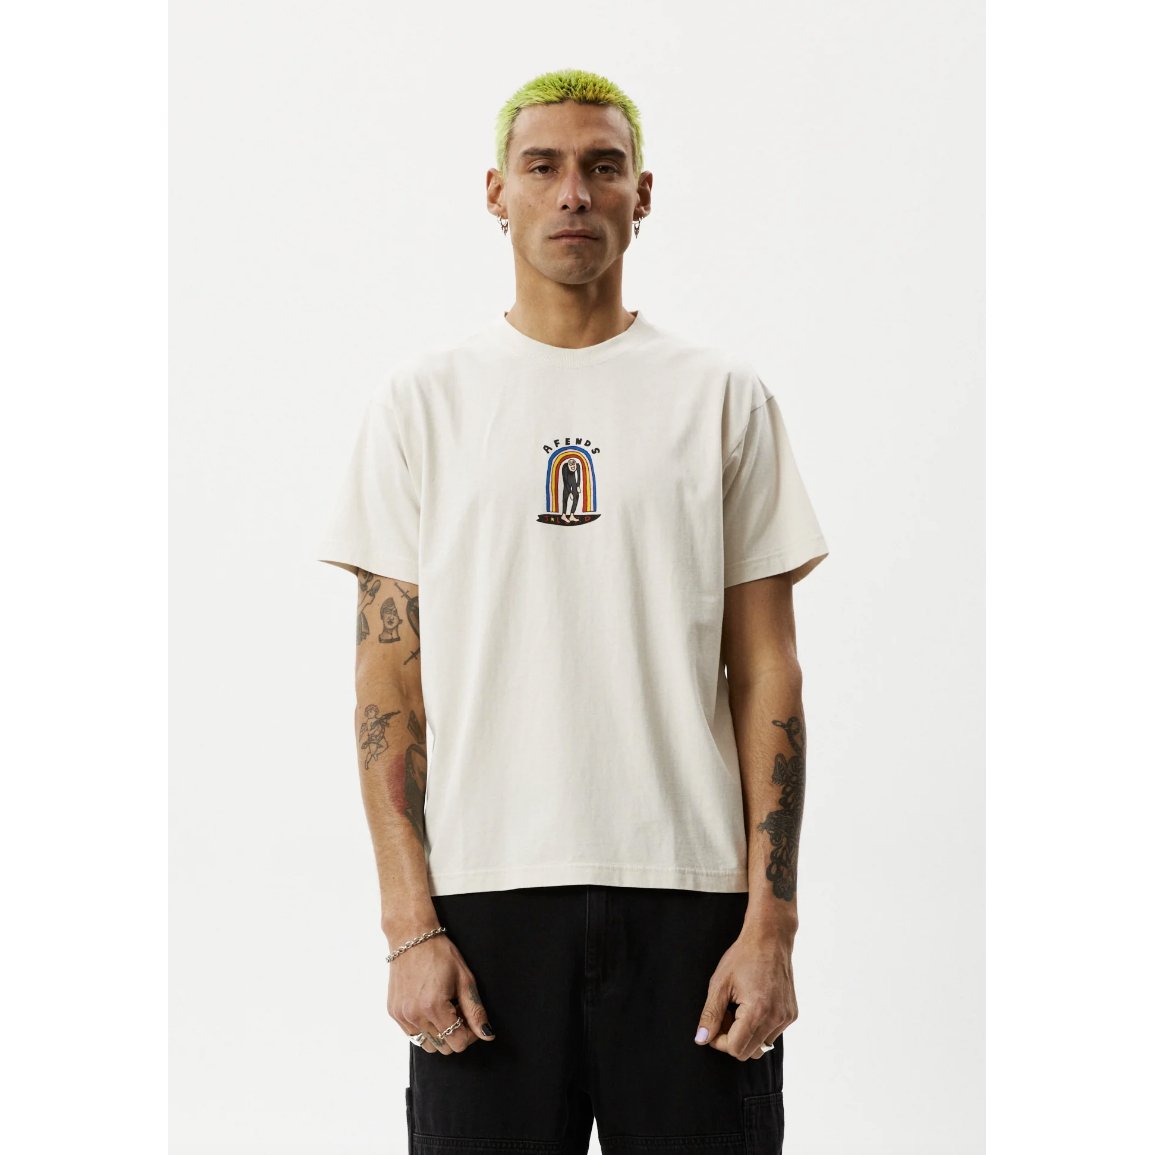 Afends - JLord Recycled Boxy Fit Tee - Velocity 21